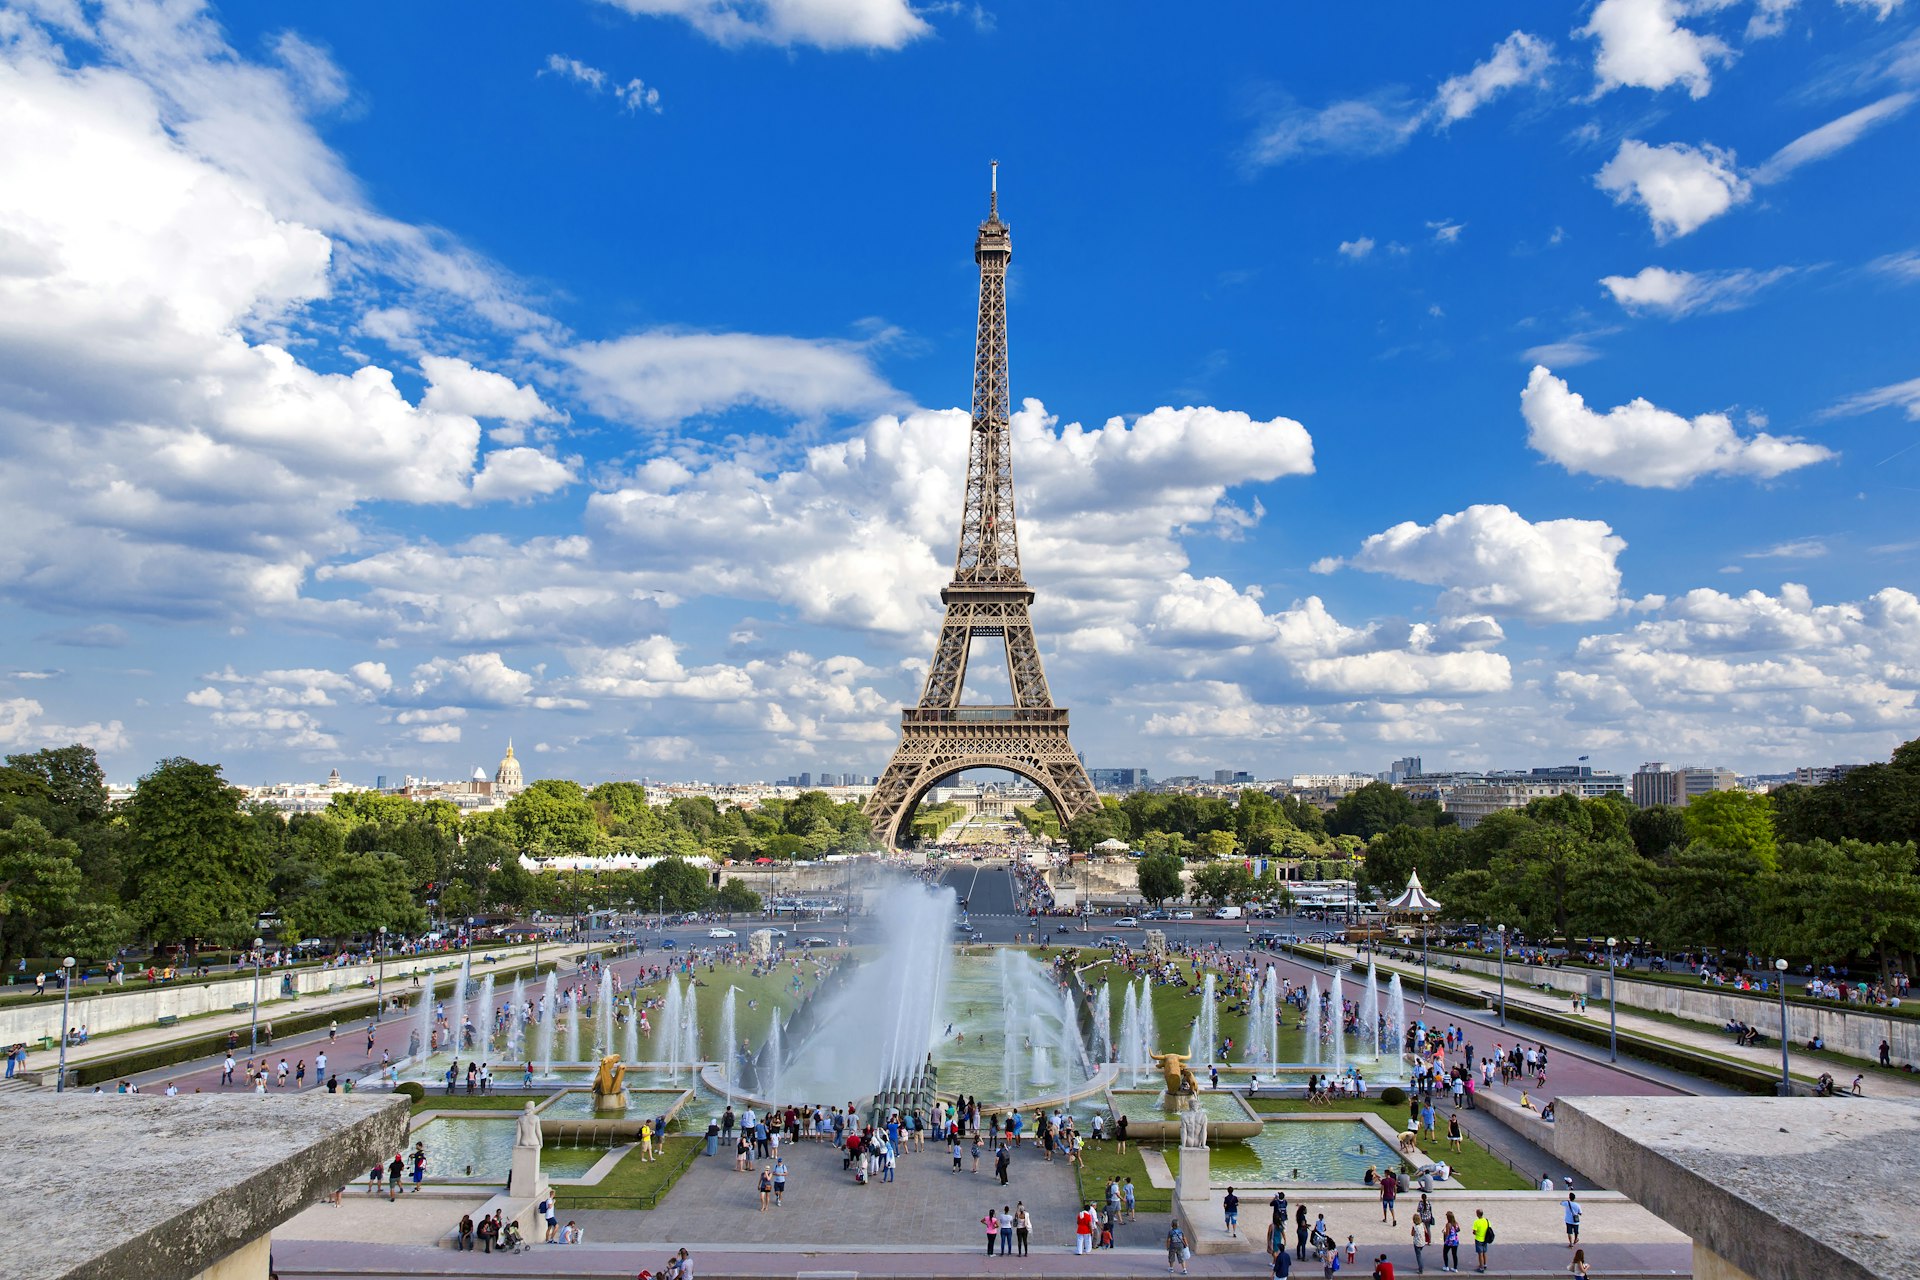 The Eiffel Tower captured on a bright, sunny day from the Trocadéro Gardens across the river. Many visitors are gathered in the gardens.